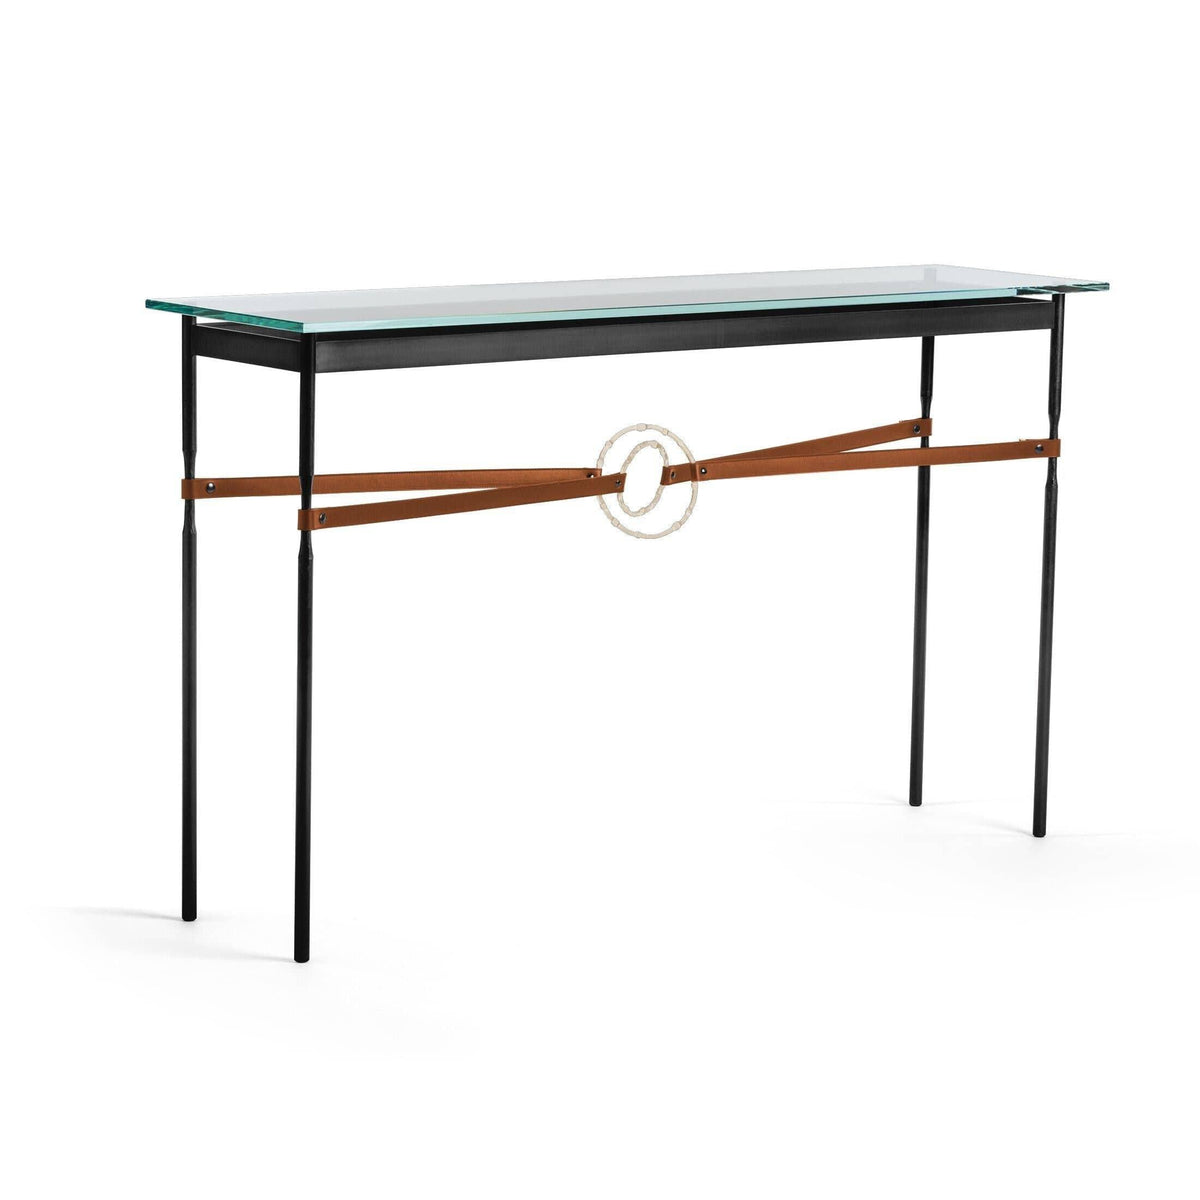 Hubbardton Forge - Equus Chestnut Leather Console Table - 750118-10-84-LC-VA0714 | Montreal Lighting & Hardware